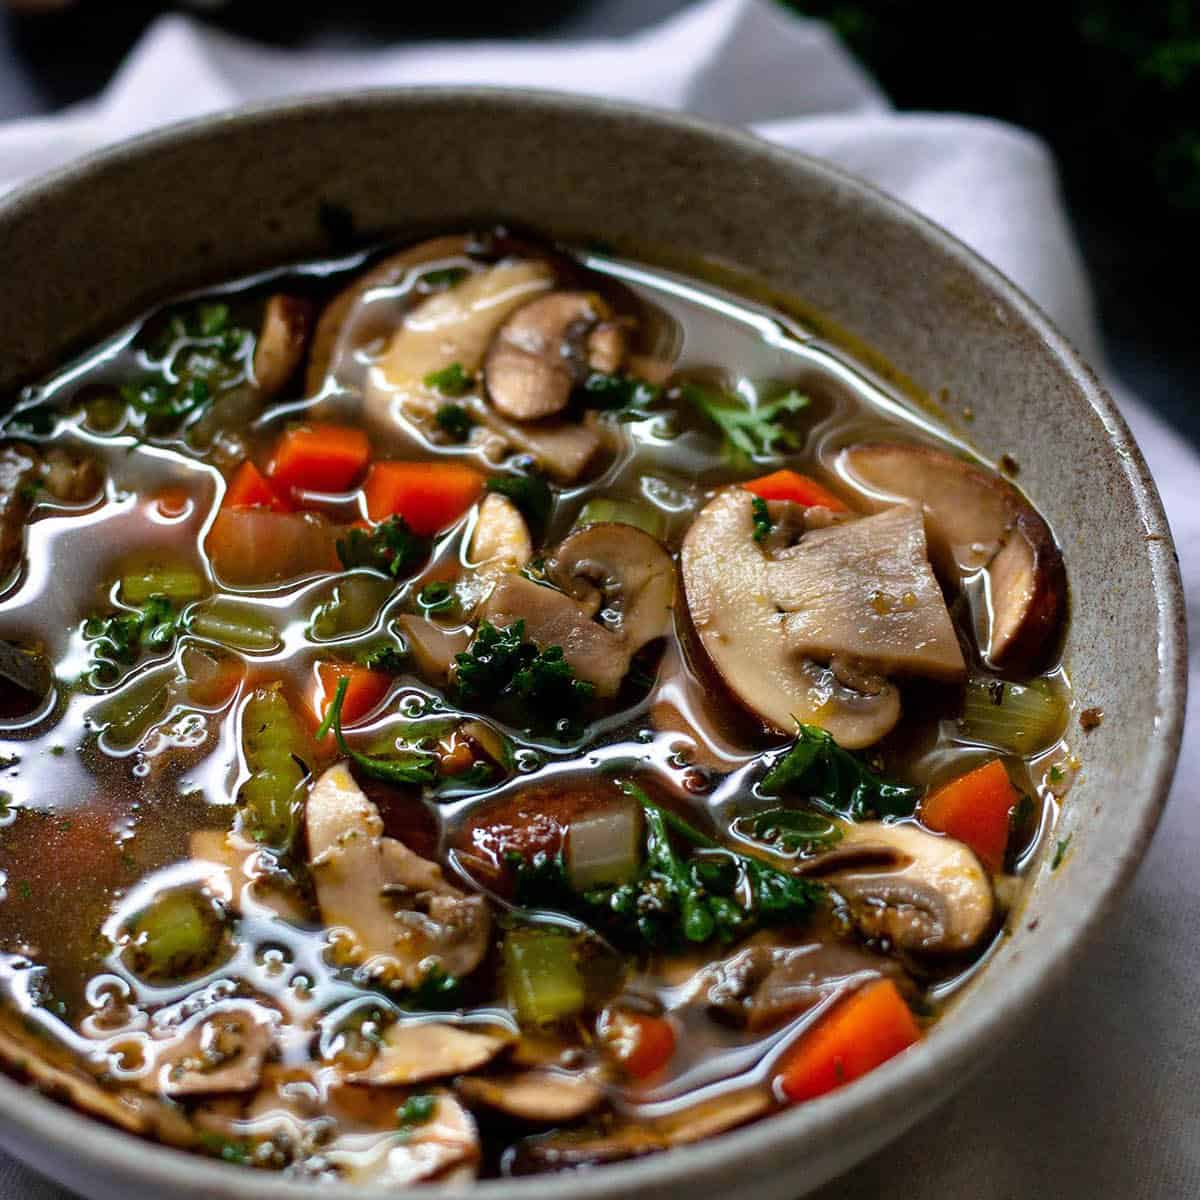 A bowl of soup with mushrooms, fresh veggies, beef stock and parsley. 